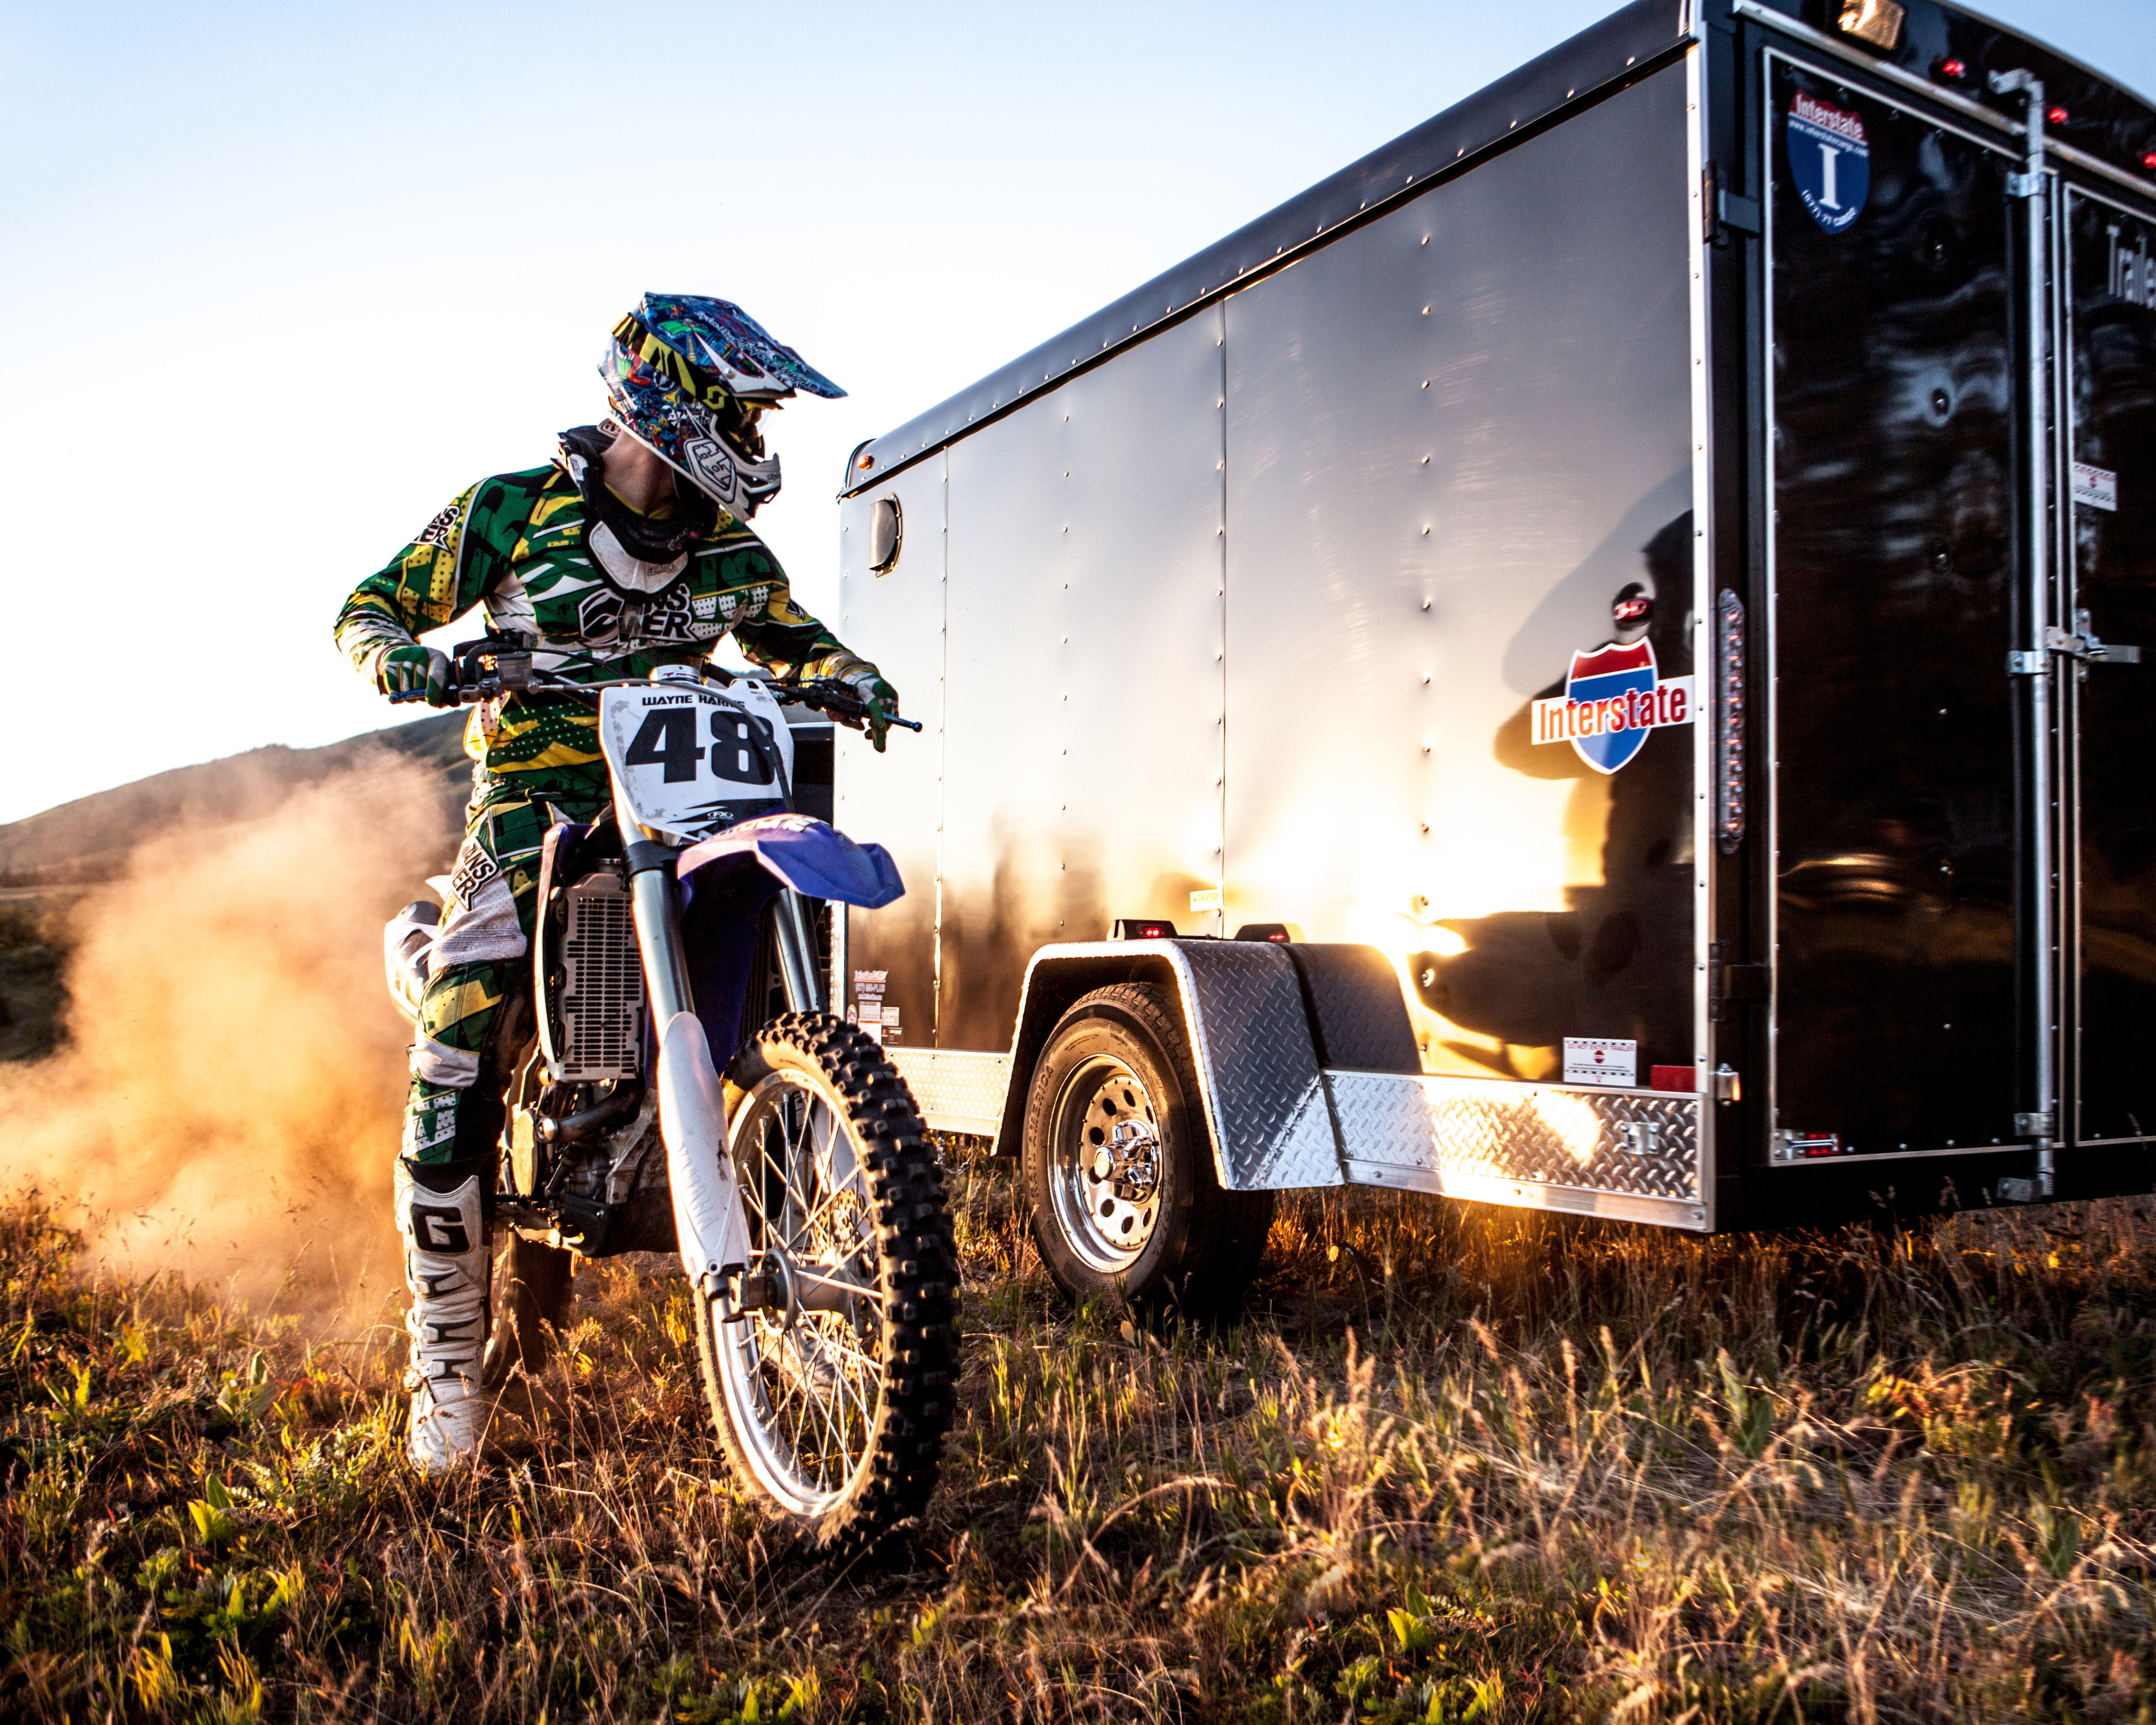 Dirtbike with enclosed trailer TrailersPlus Fort Collins (970)818-0670